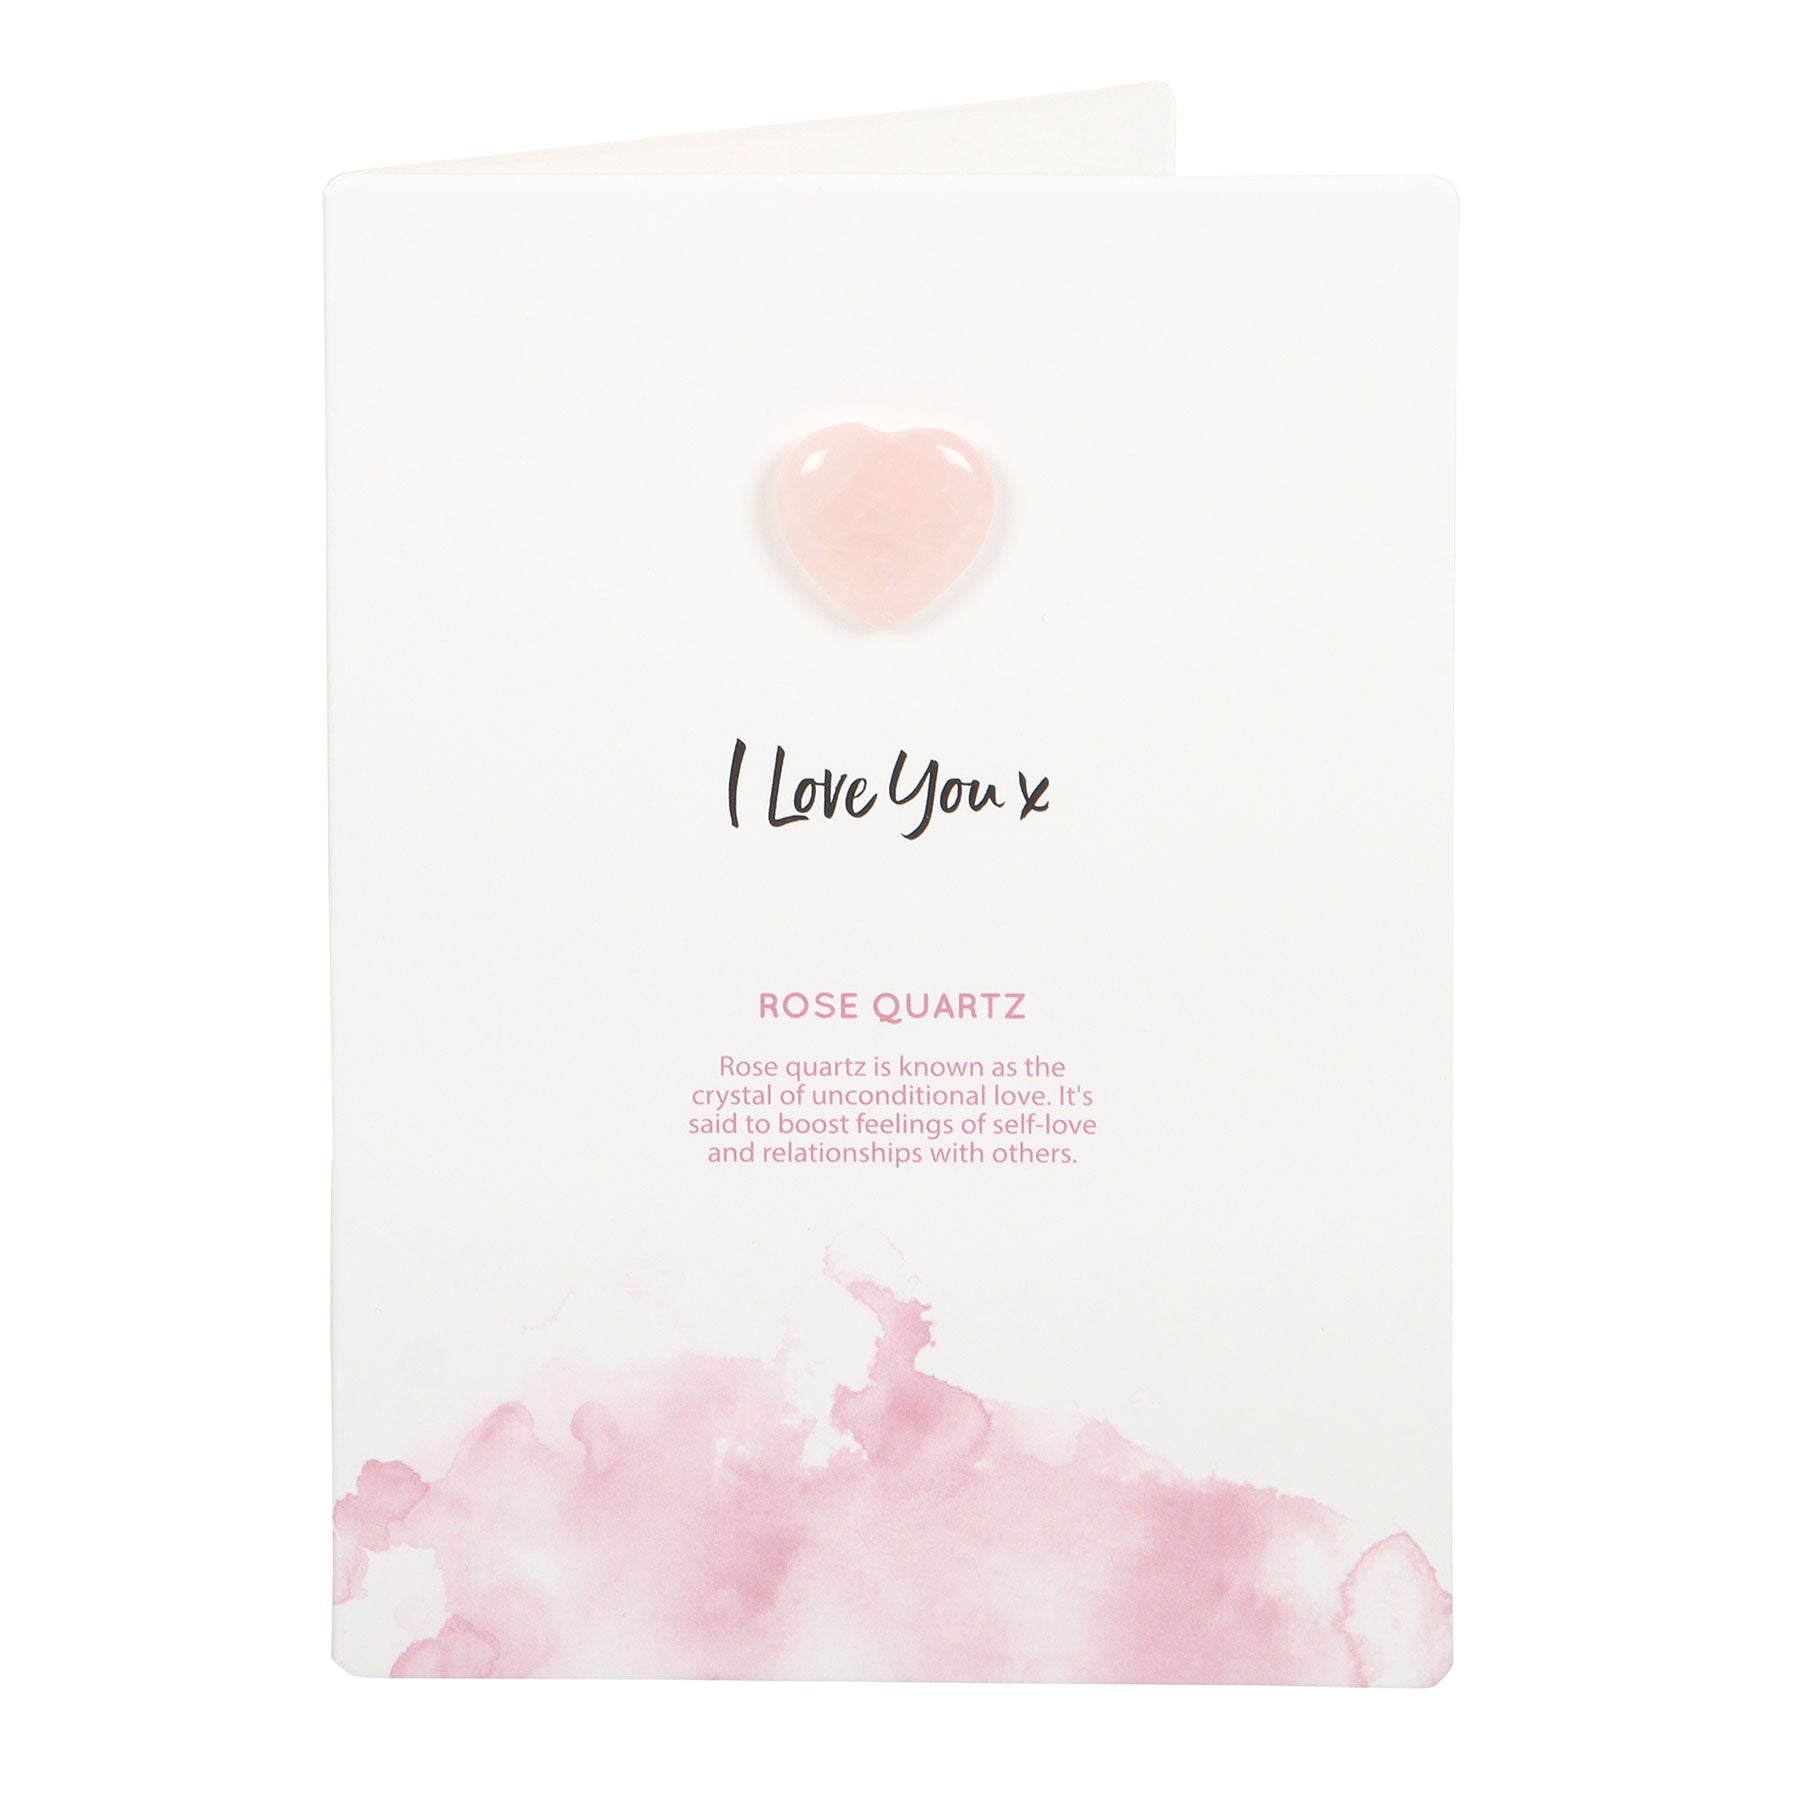 View I Love You Rose Quartz Crystal Heart Greeting Card information